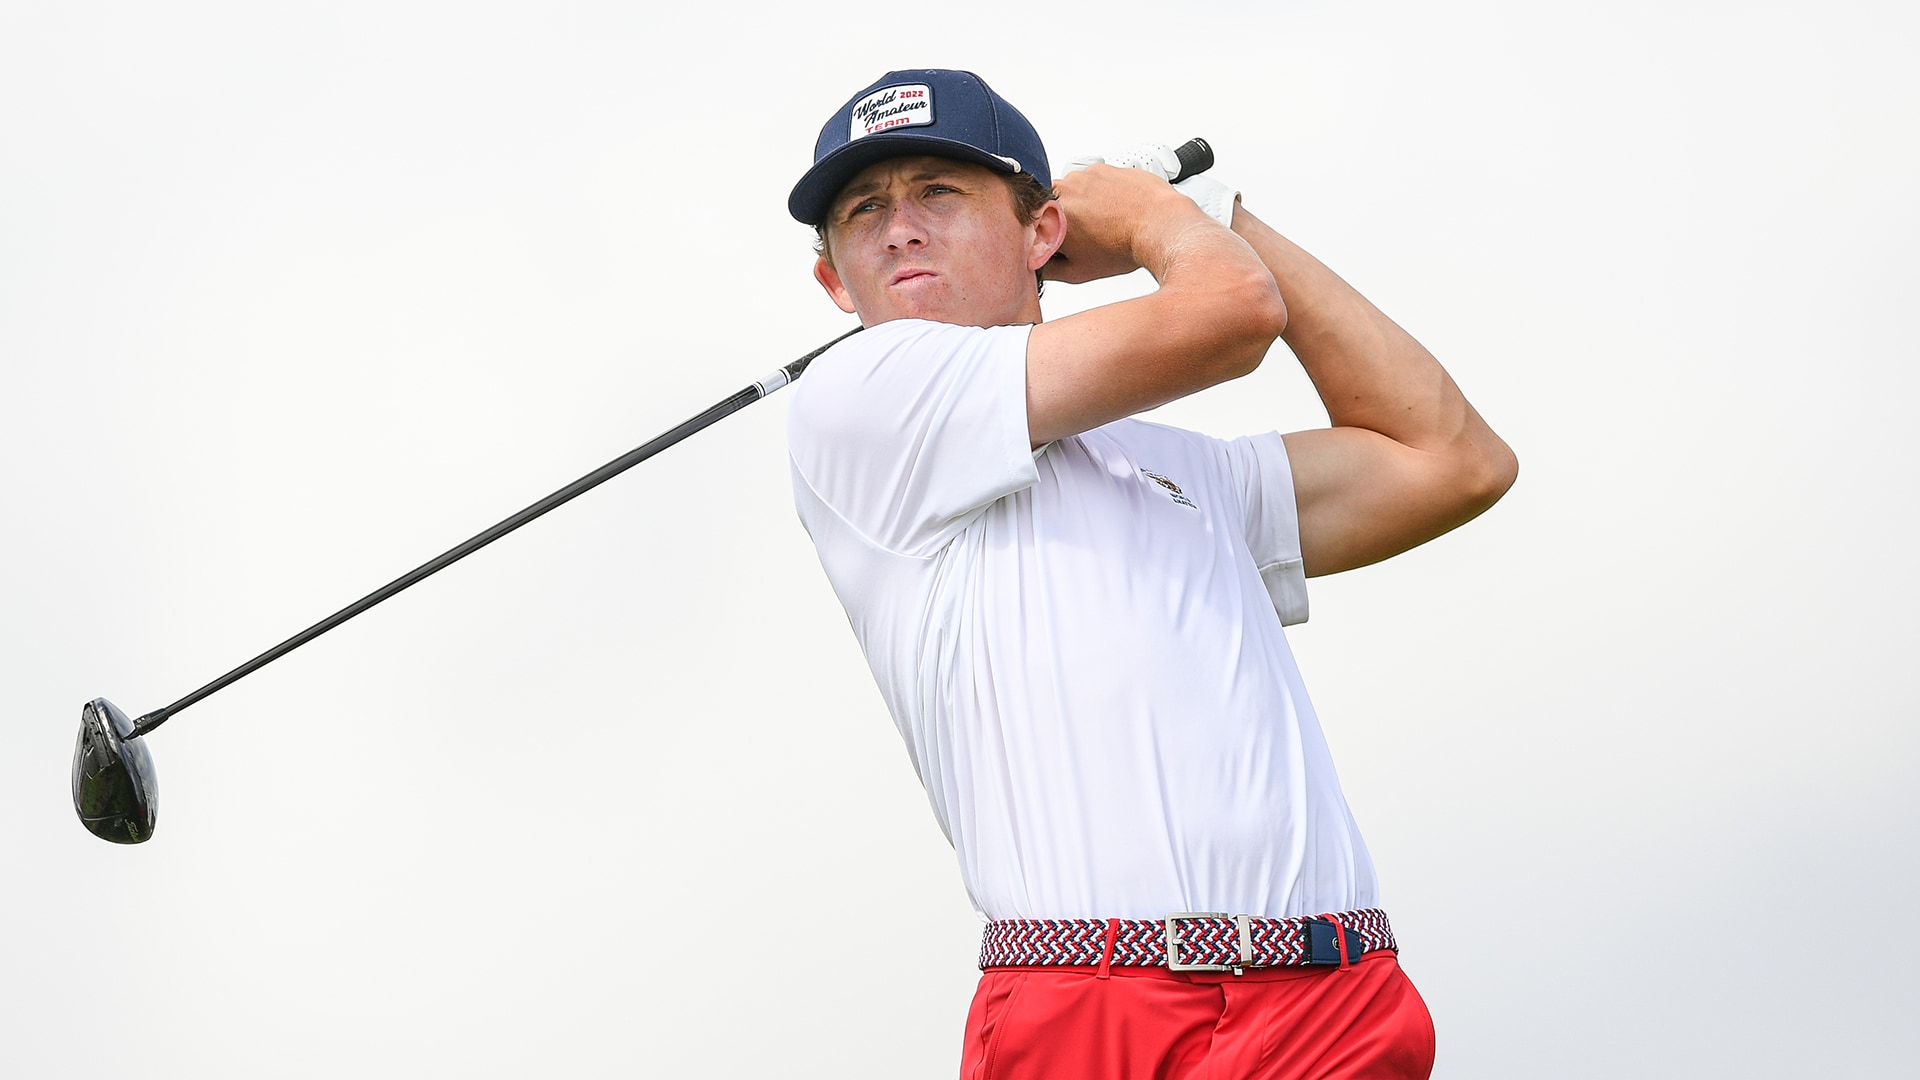 Gordon Sargent, Michael Thorbjornsen and 14 others to attend U.S. Walker Cup practice session